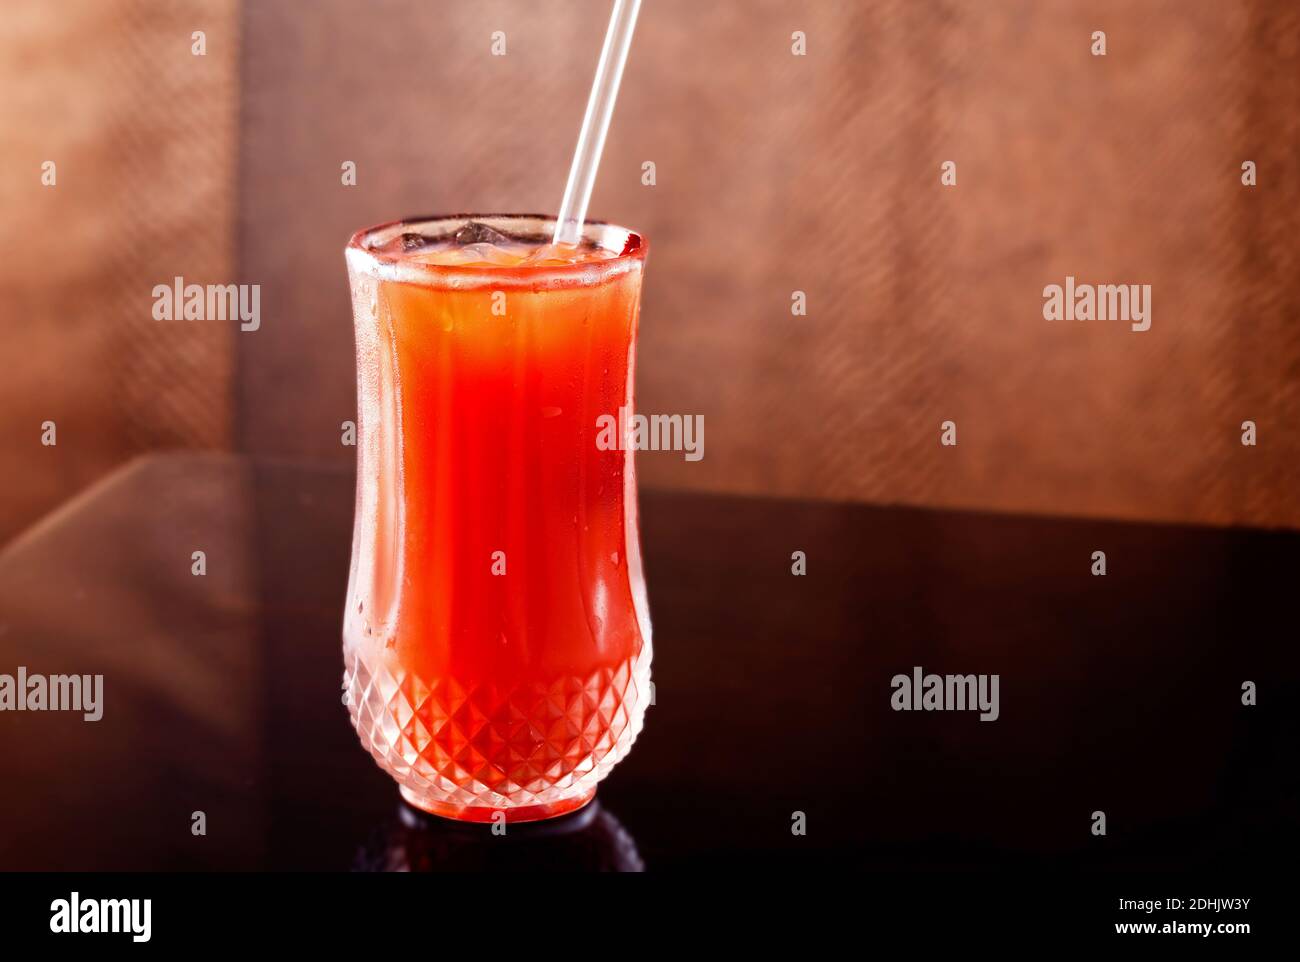 Grenadine and orange juice in a glass with copy space Stock Photo